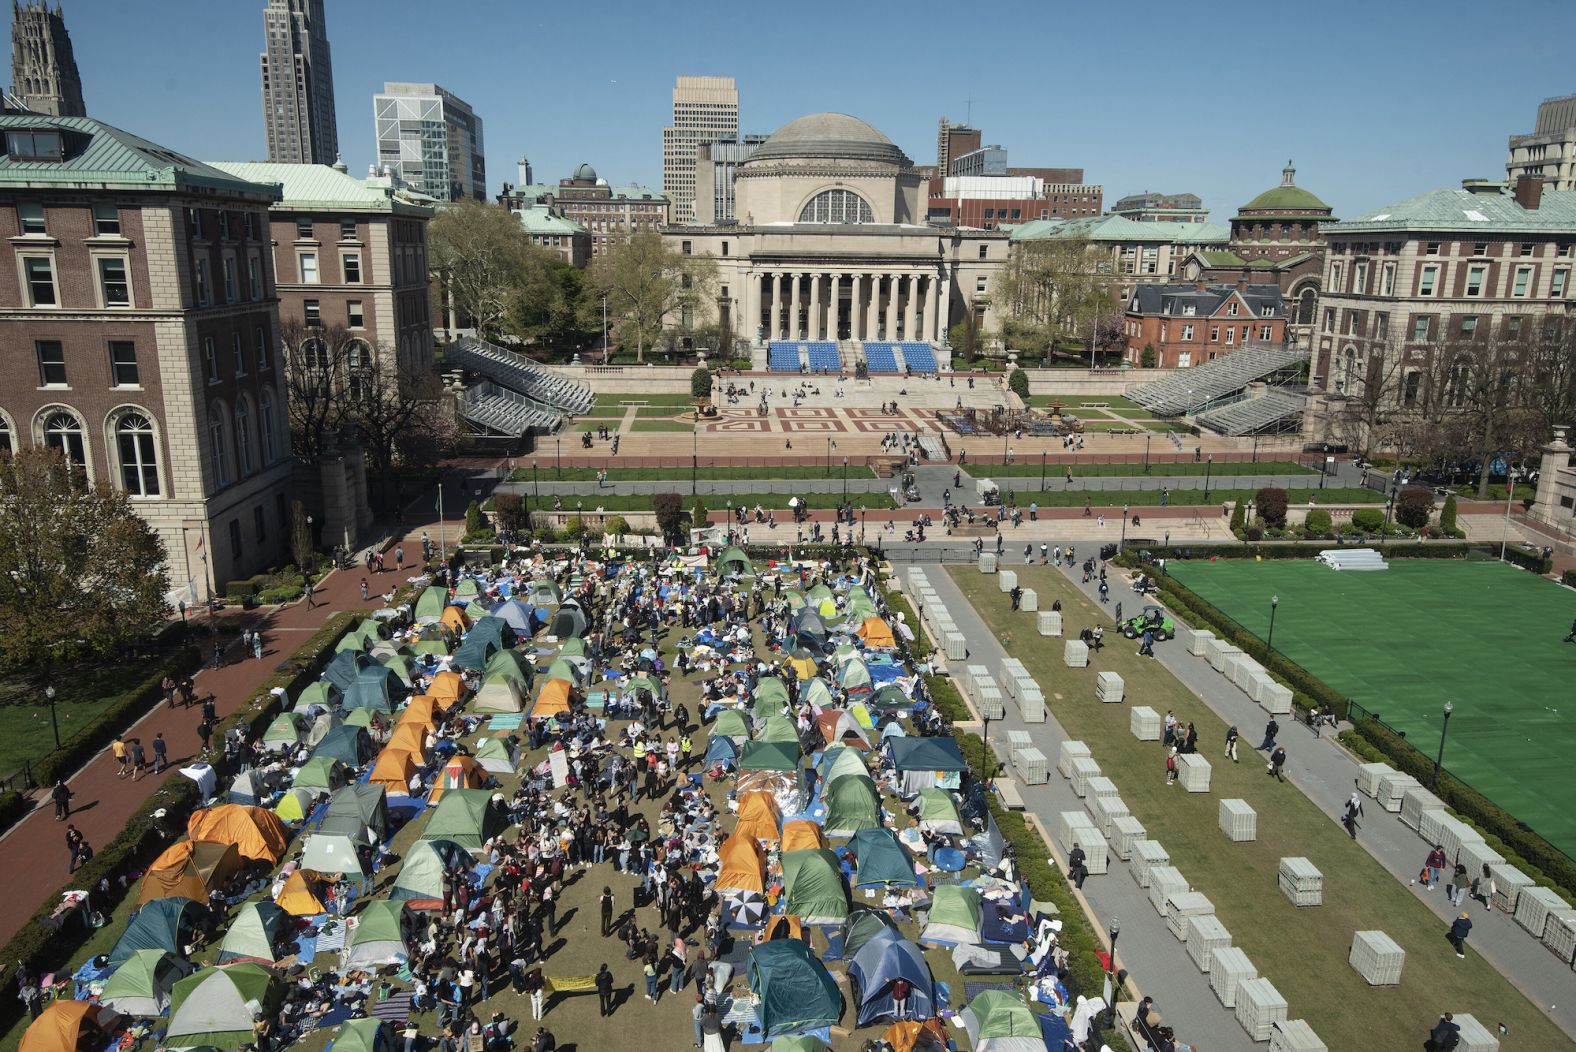 Pro-Palestinian protesters camp on a lawn at Columbia University in New York on Monday, April 22.